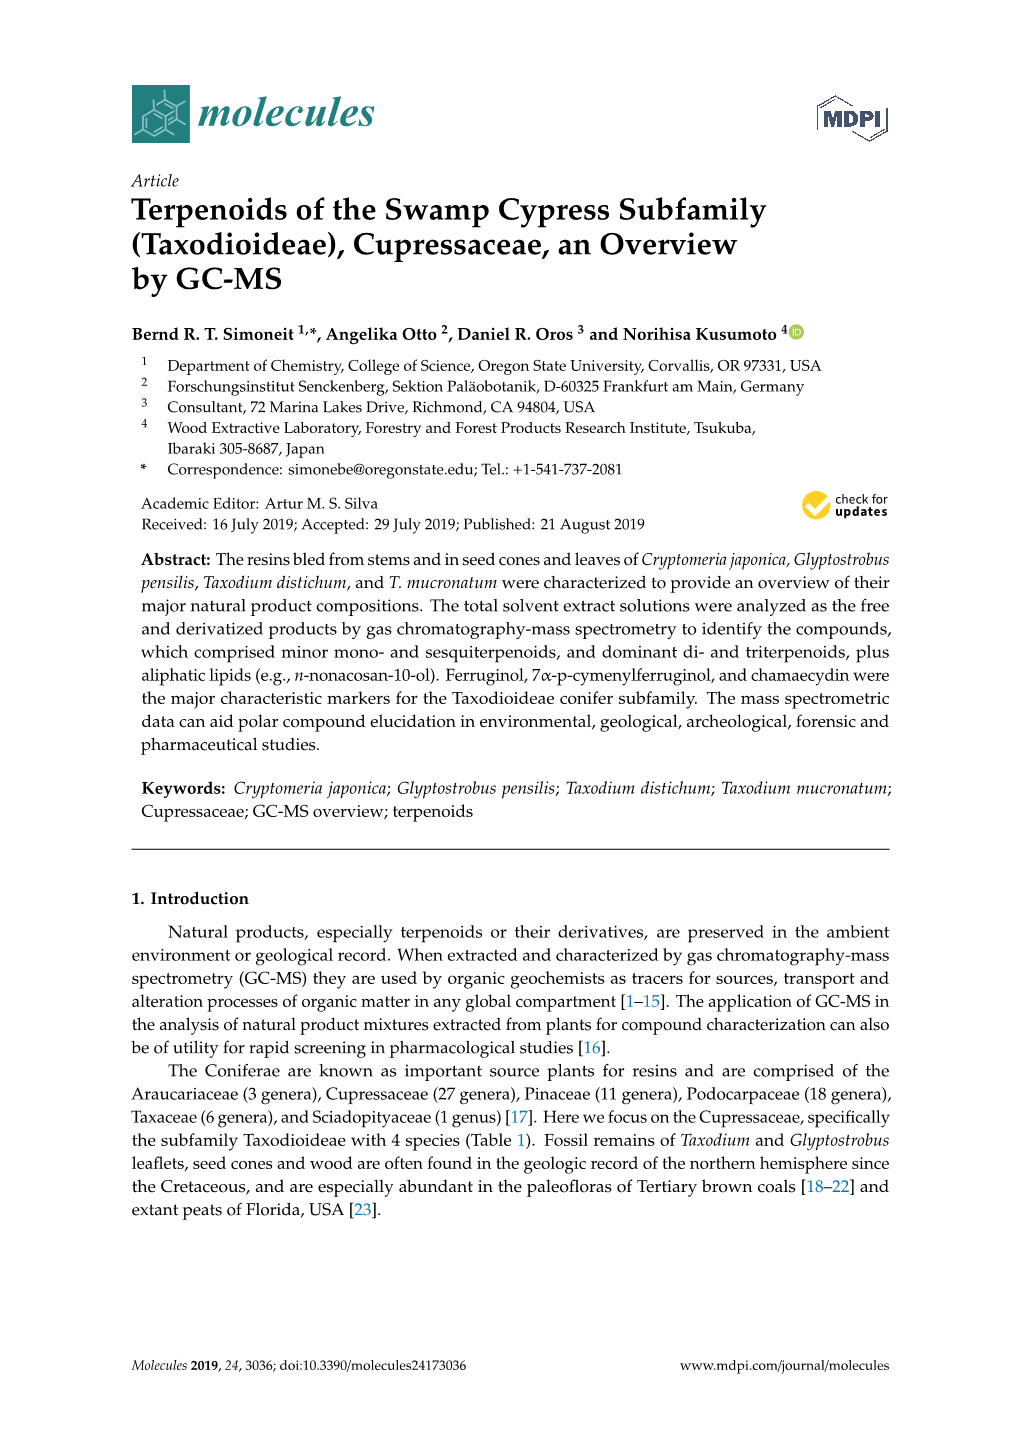 (Taxodioideae), Cupressaceae, an Overview by GC-MS